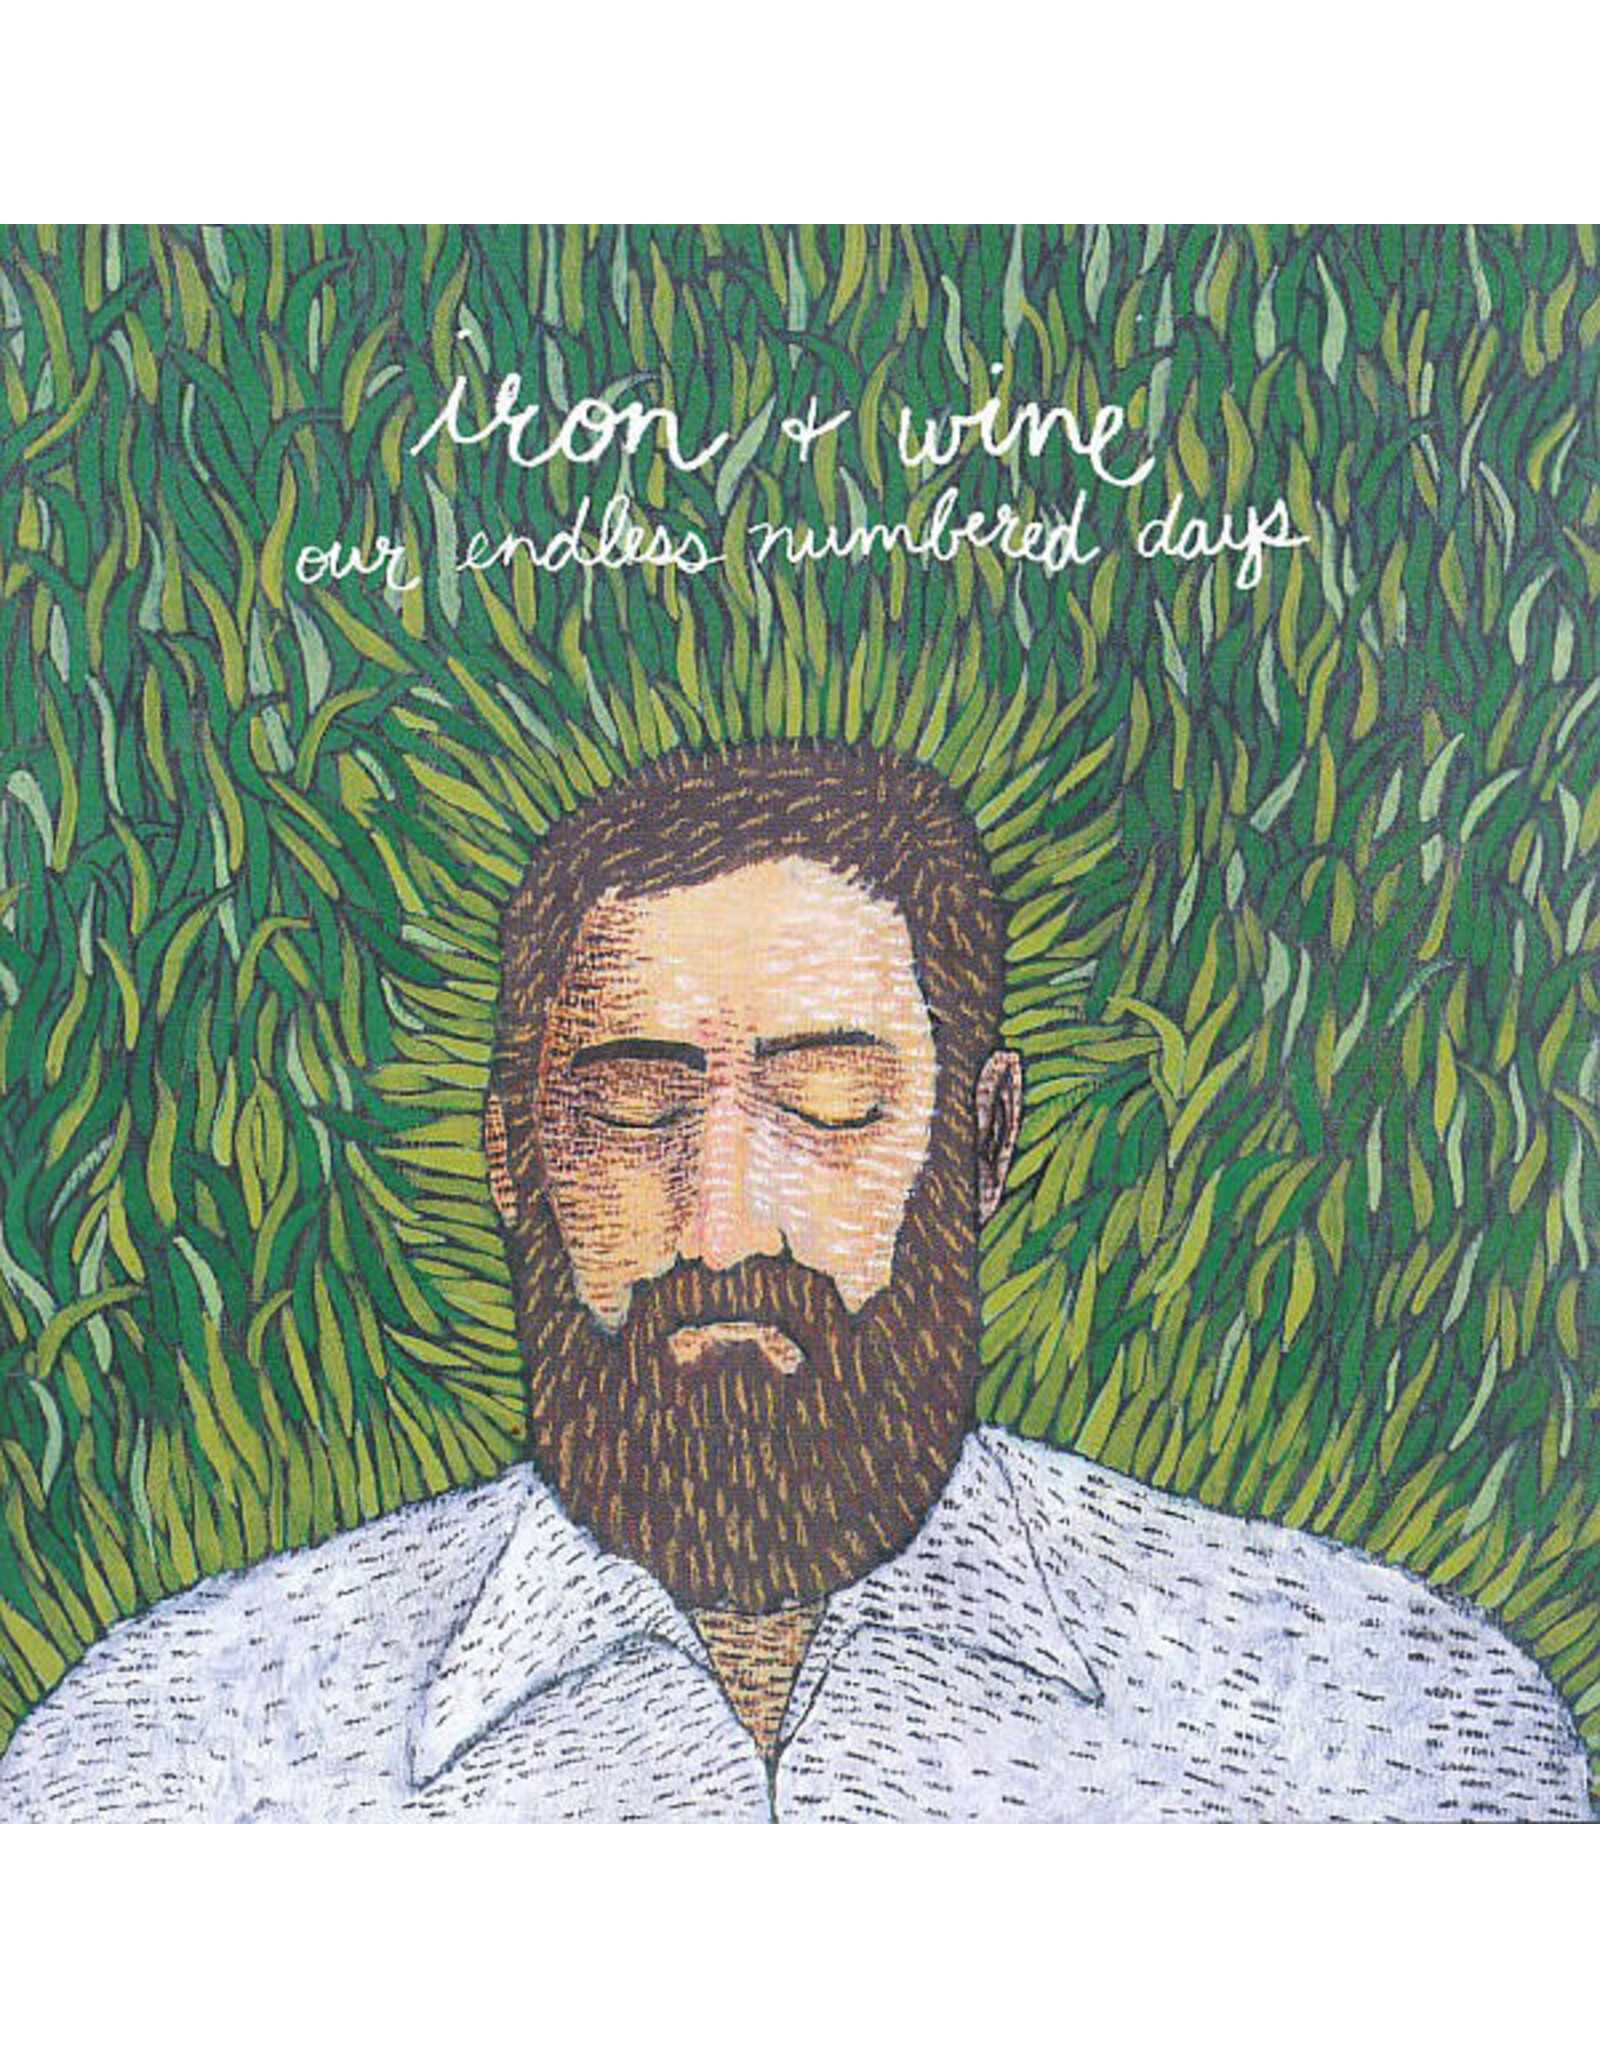 IRON & WINE / OUR ENDLESS NUMBERED DAYS